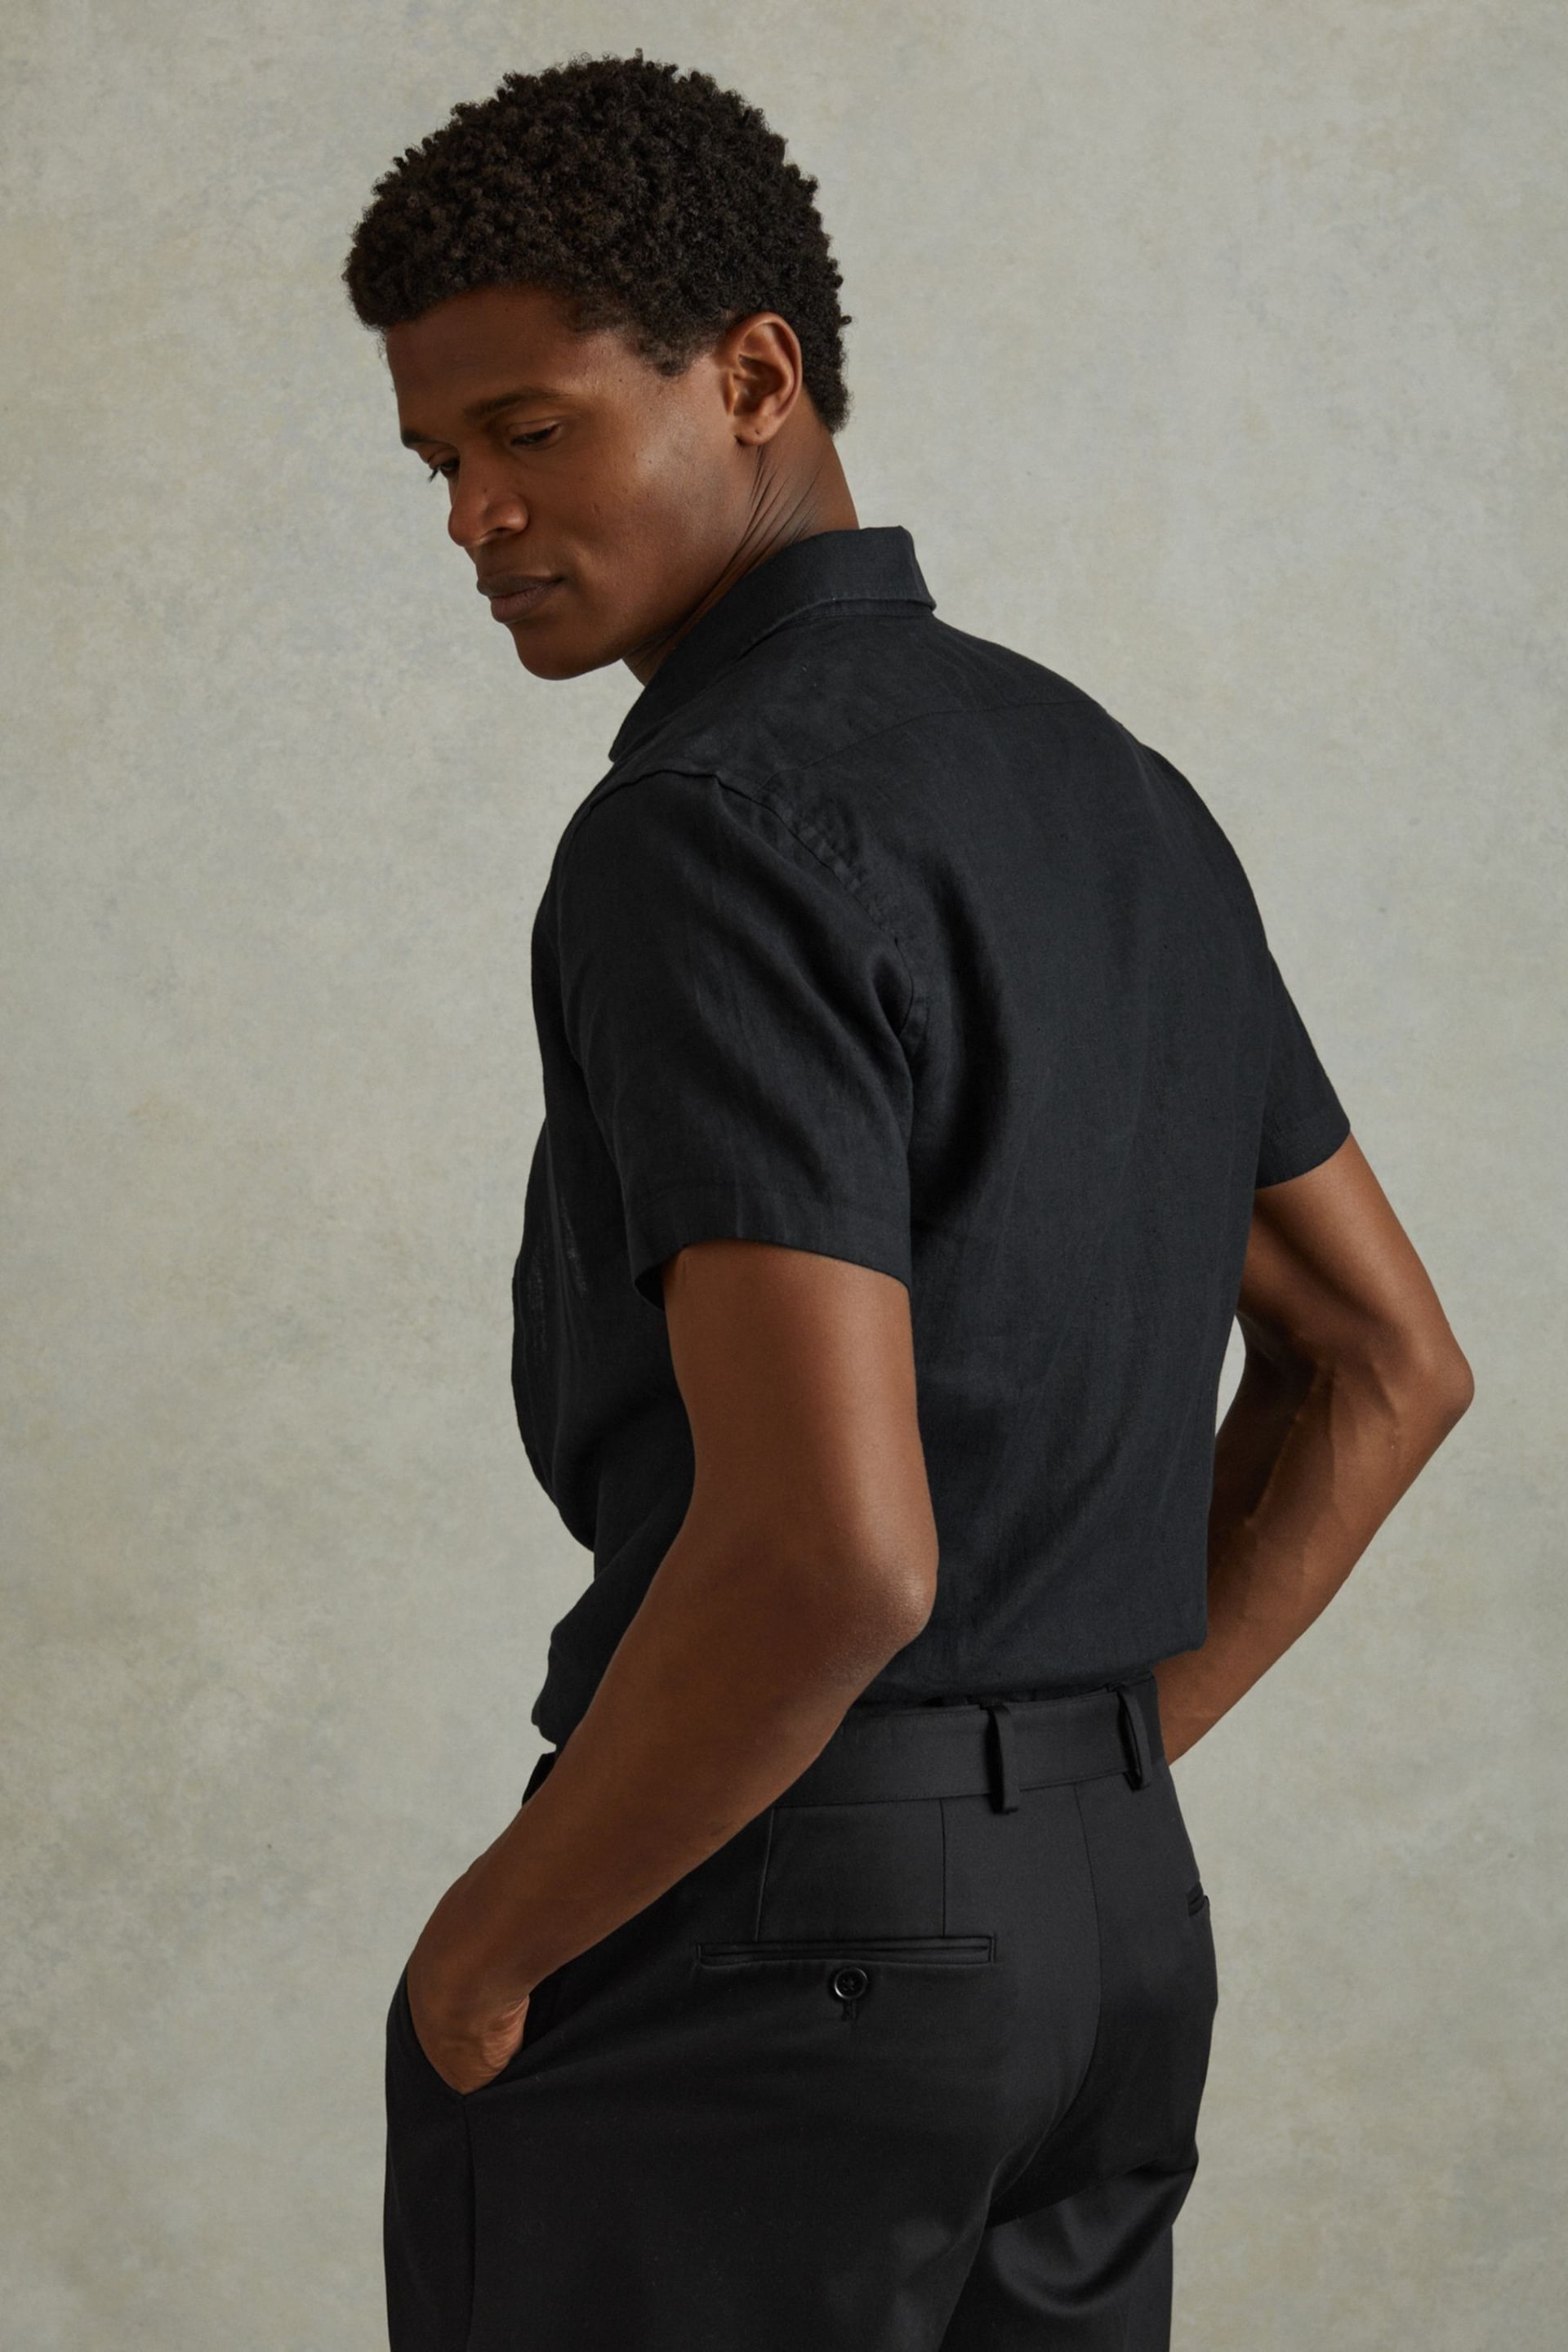 Reiss Black Holiday Slim Fit Linen Shirt - Image 4 of 5